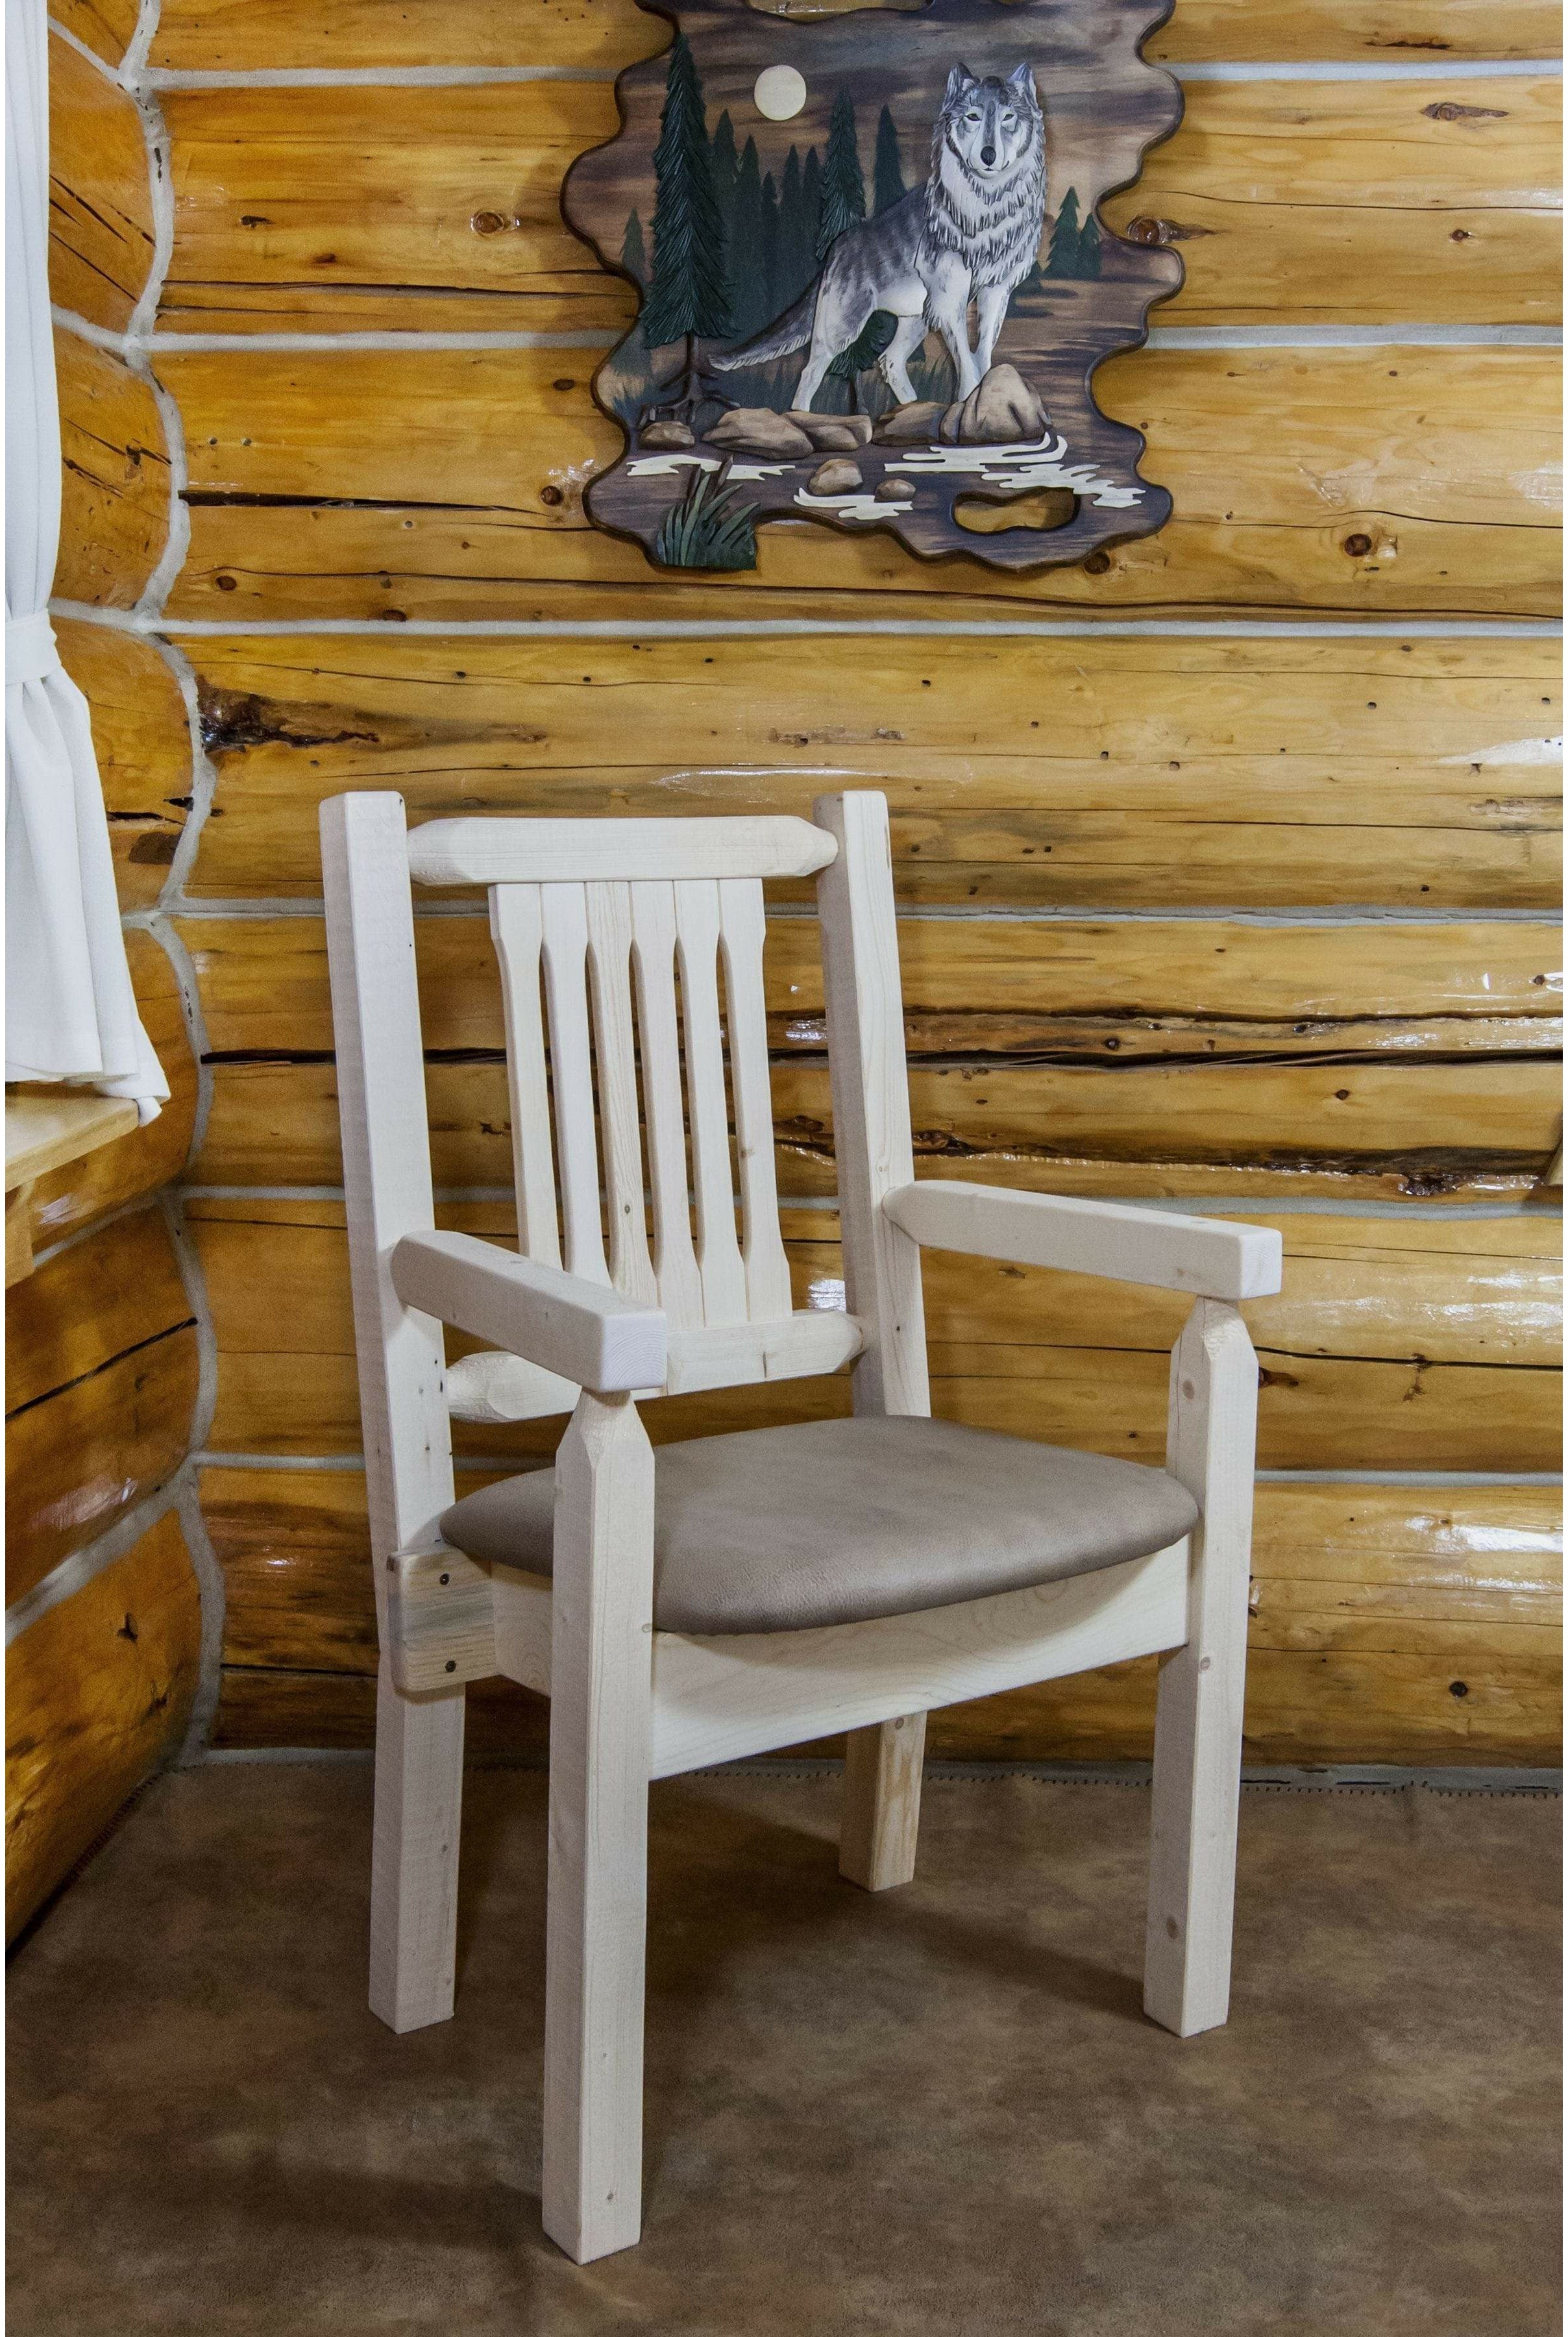 Montana Woodworks Homestead Collection Captain's Chair with Upholstered Seat - Ready to Finish-Rustic Furniture Marketplace